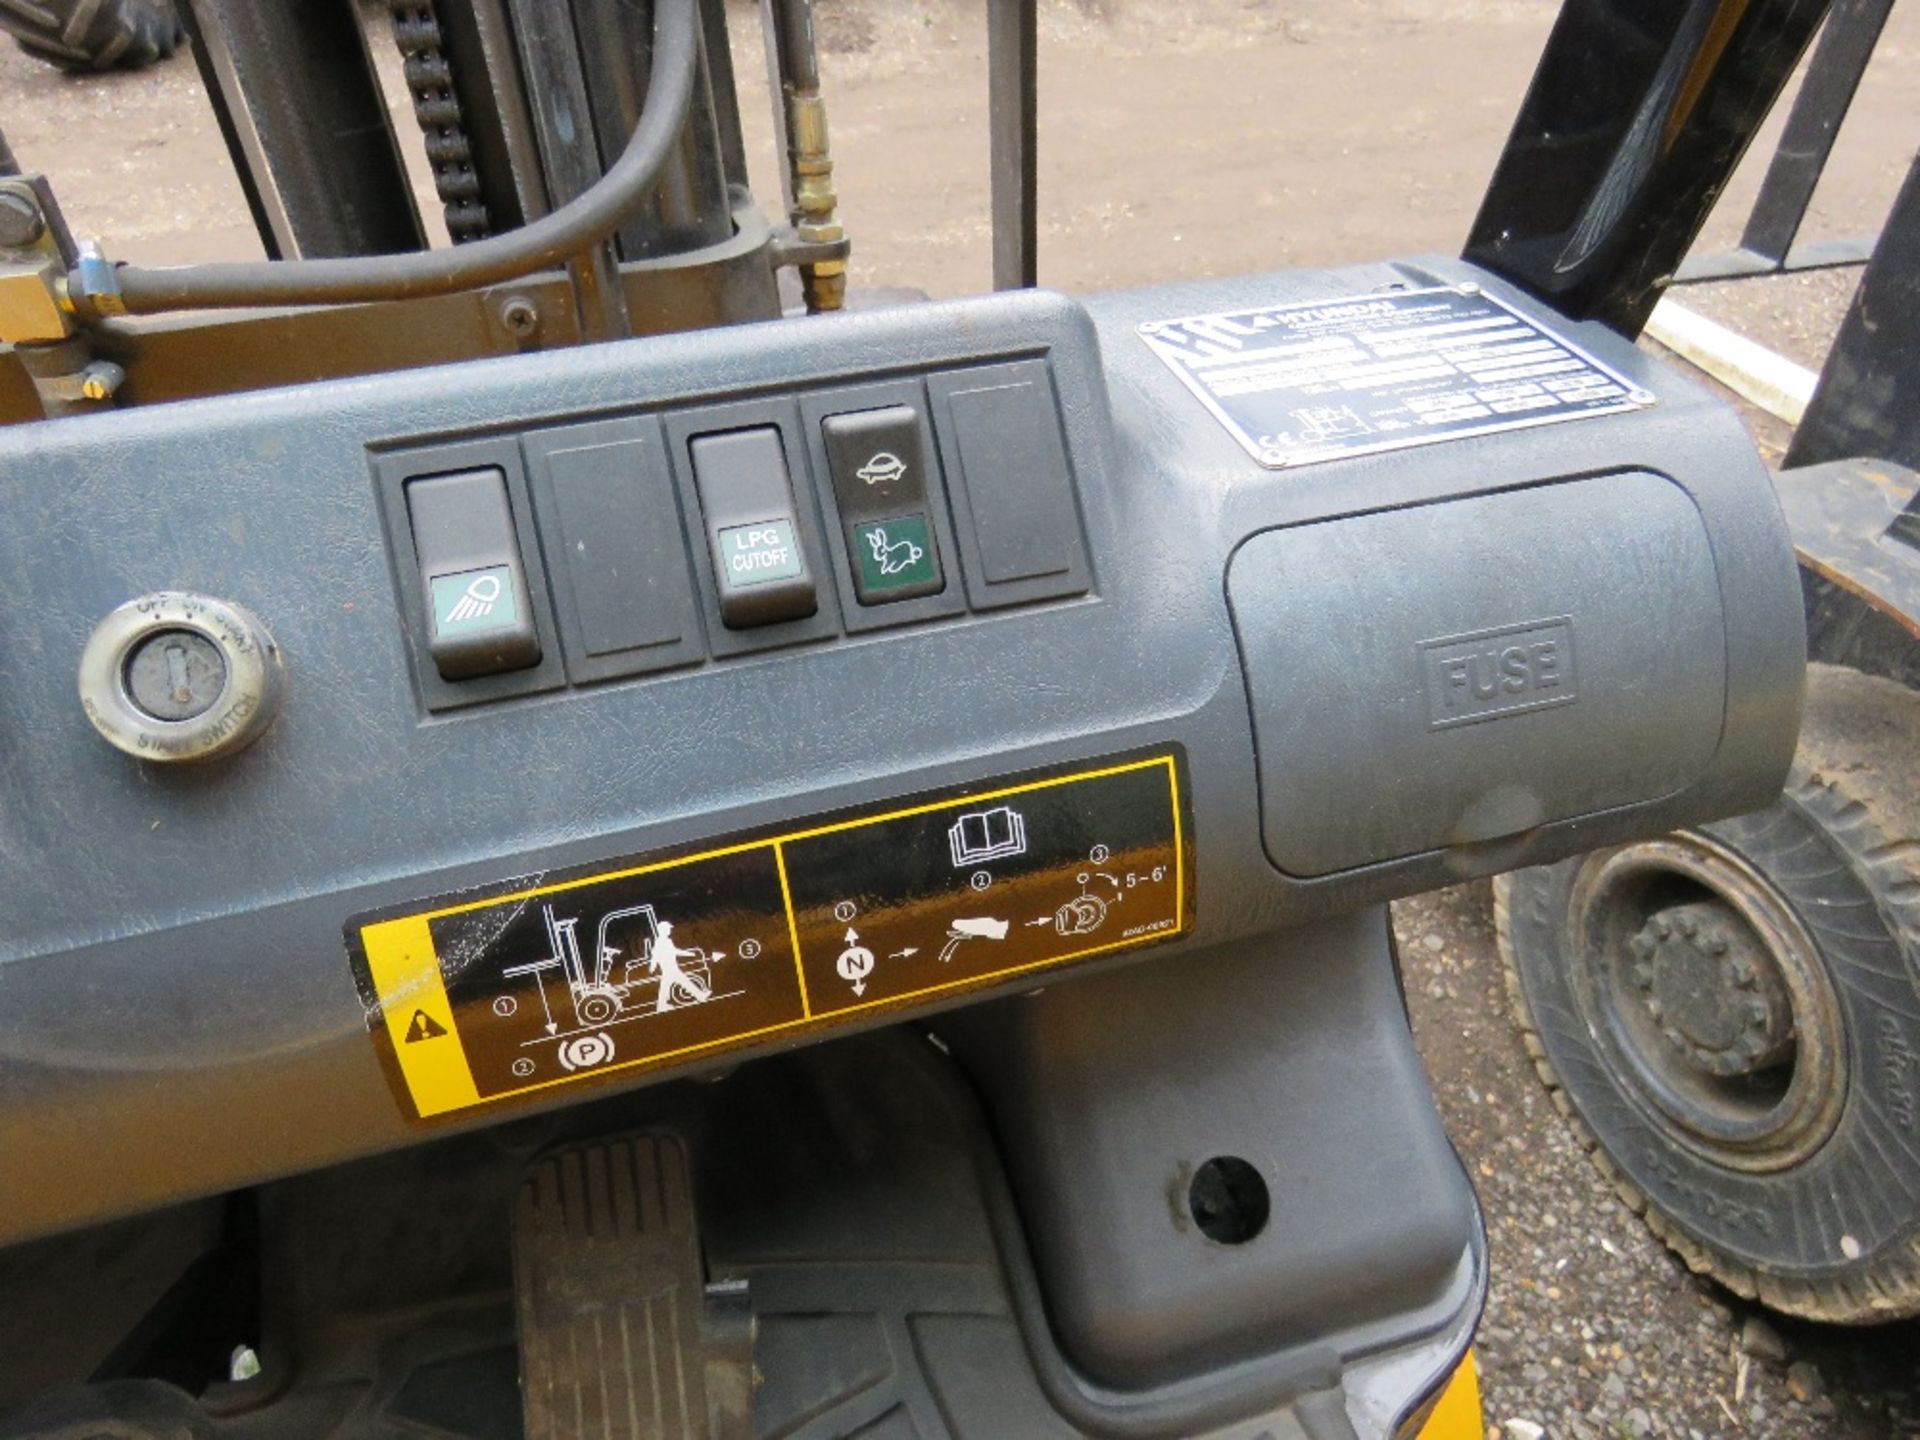 HYUNDAI 20L-7M GAS POWERED FORKLIFT TRUCK, YEAR 2018. 1600 REC HOURS APPROX. EXTRA SERVICE. - Image 7 of 11